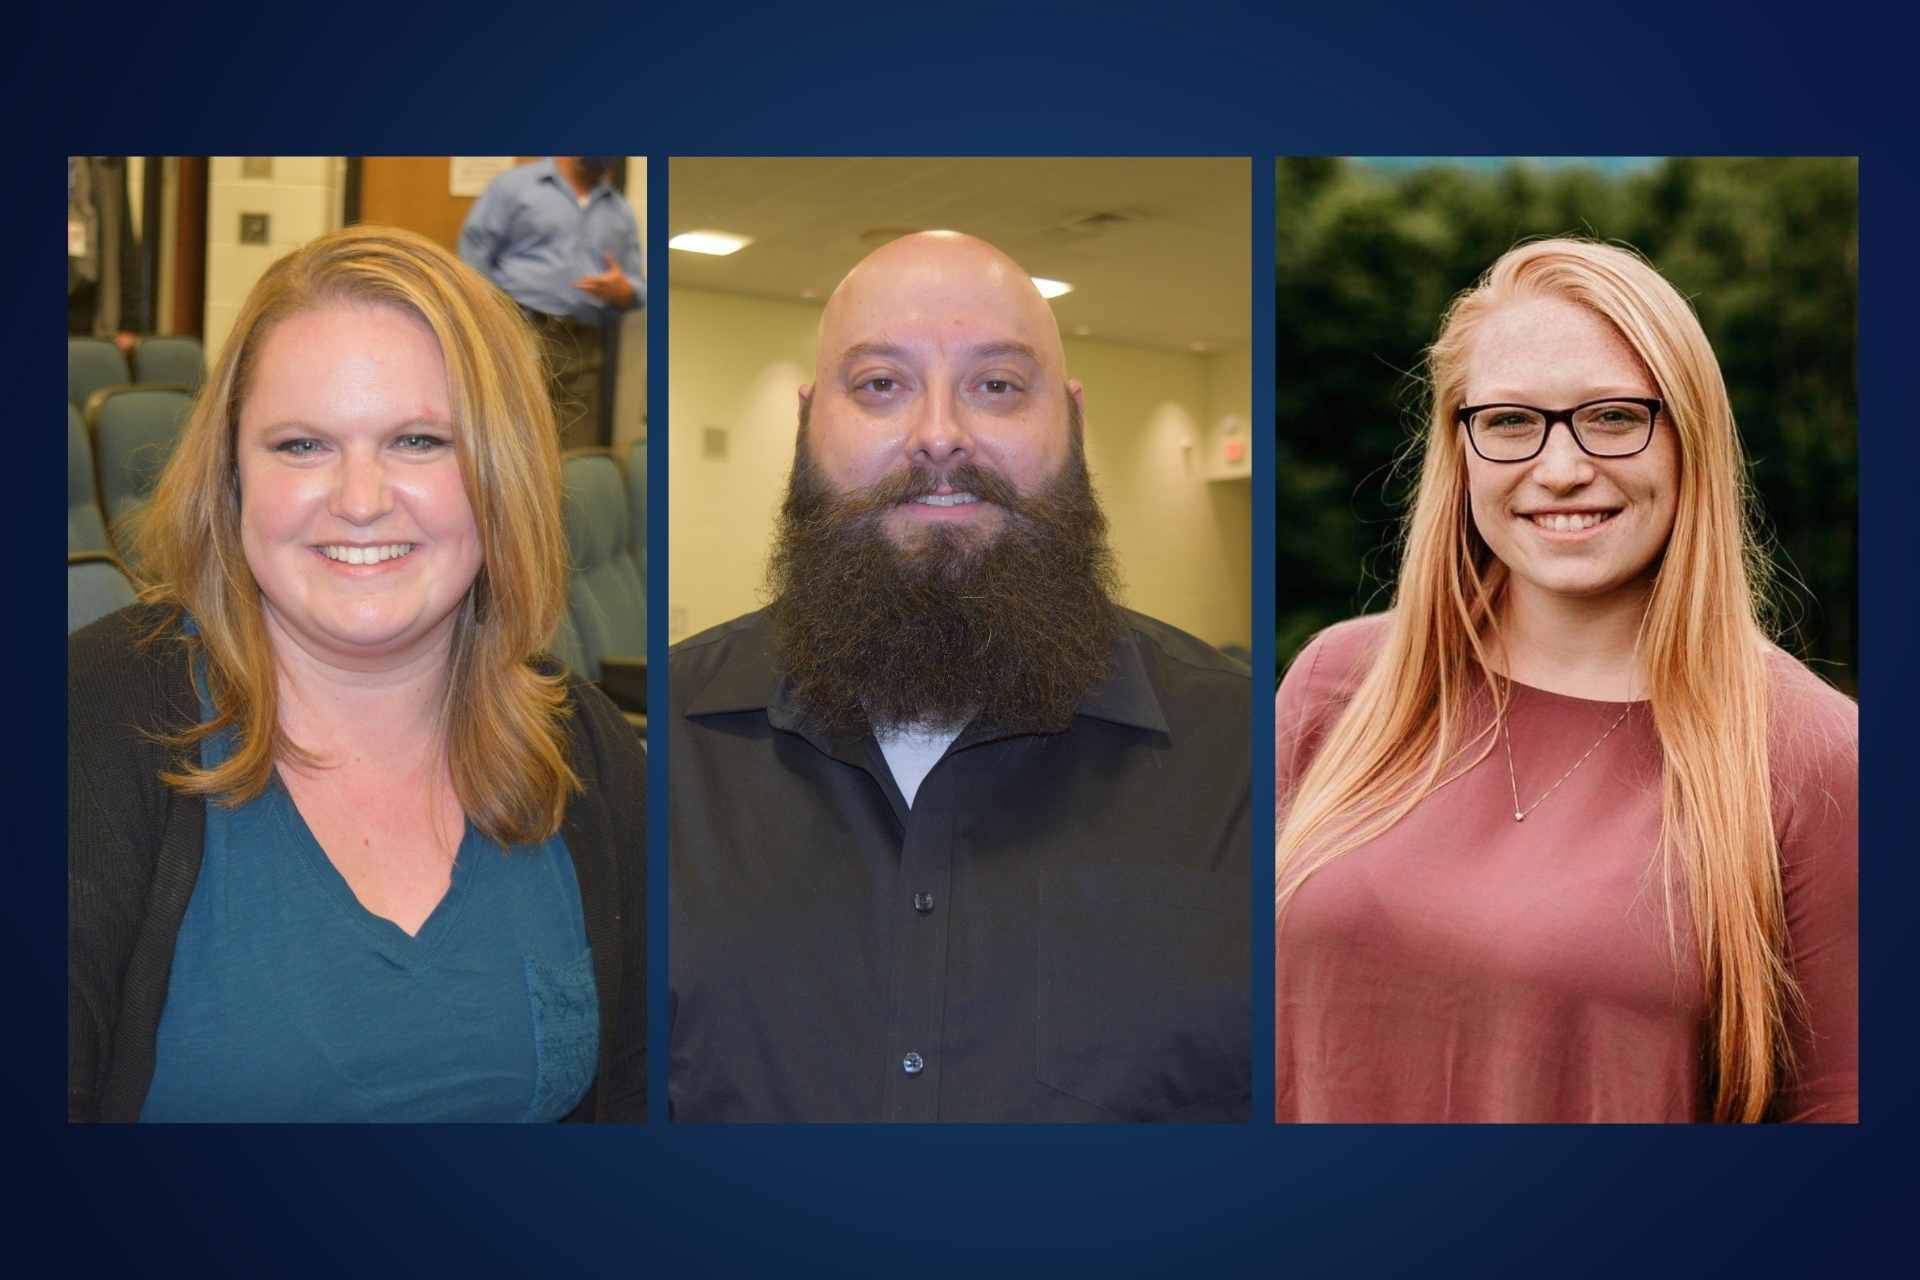 New Communities in Schools facilitators (from left) -- Abbie Golden (Washington District and Union), Jordan Hedrick (Rock Cave and French Creek) and Jordon Barr (Hodgesville and Tennerton)